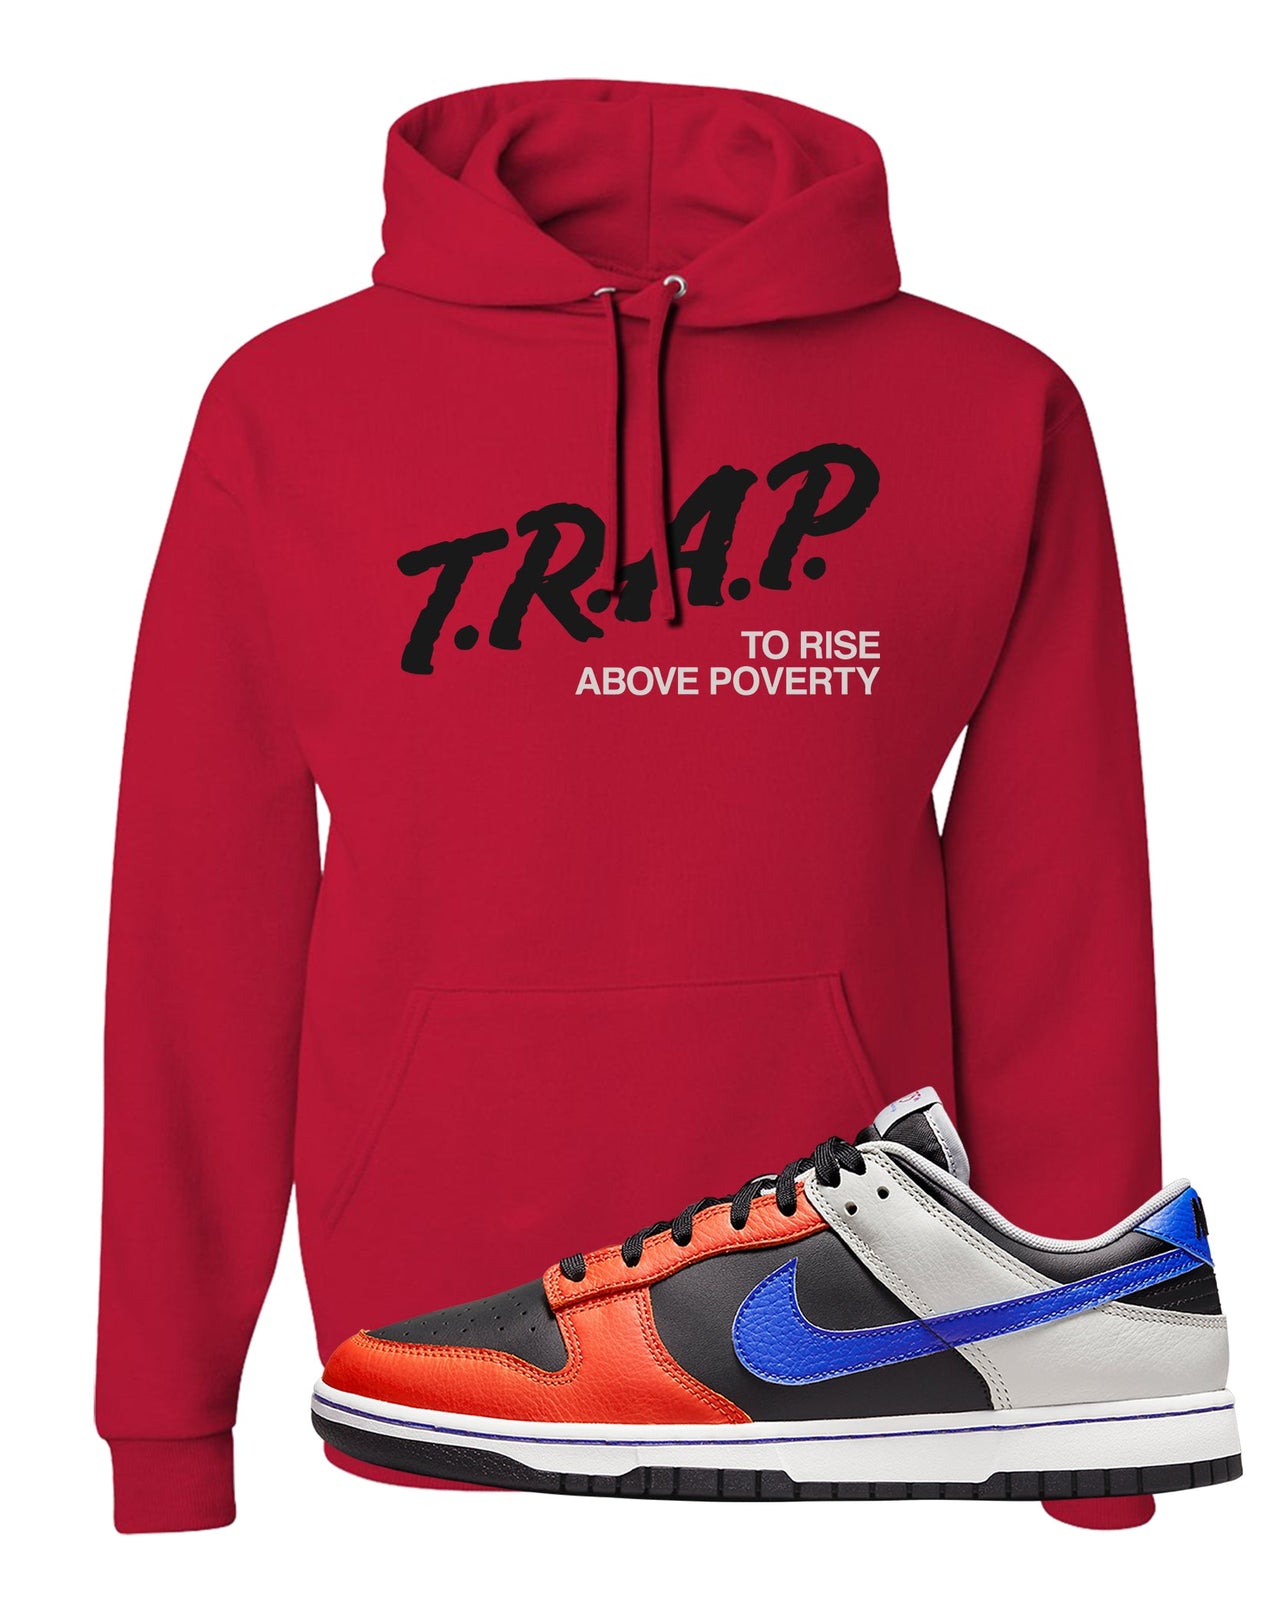 75th Anniversary Low Dunks Hoodie | Trap To Rise Above Poverty, Red